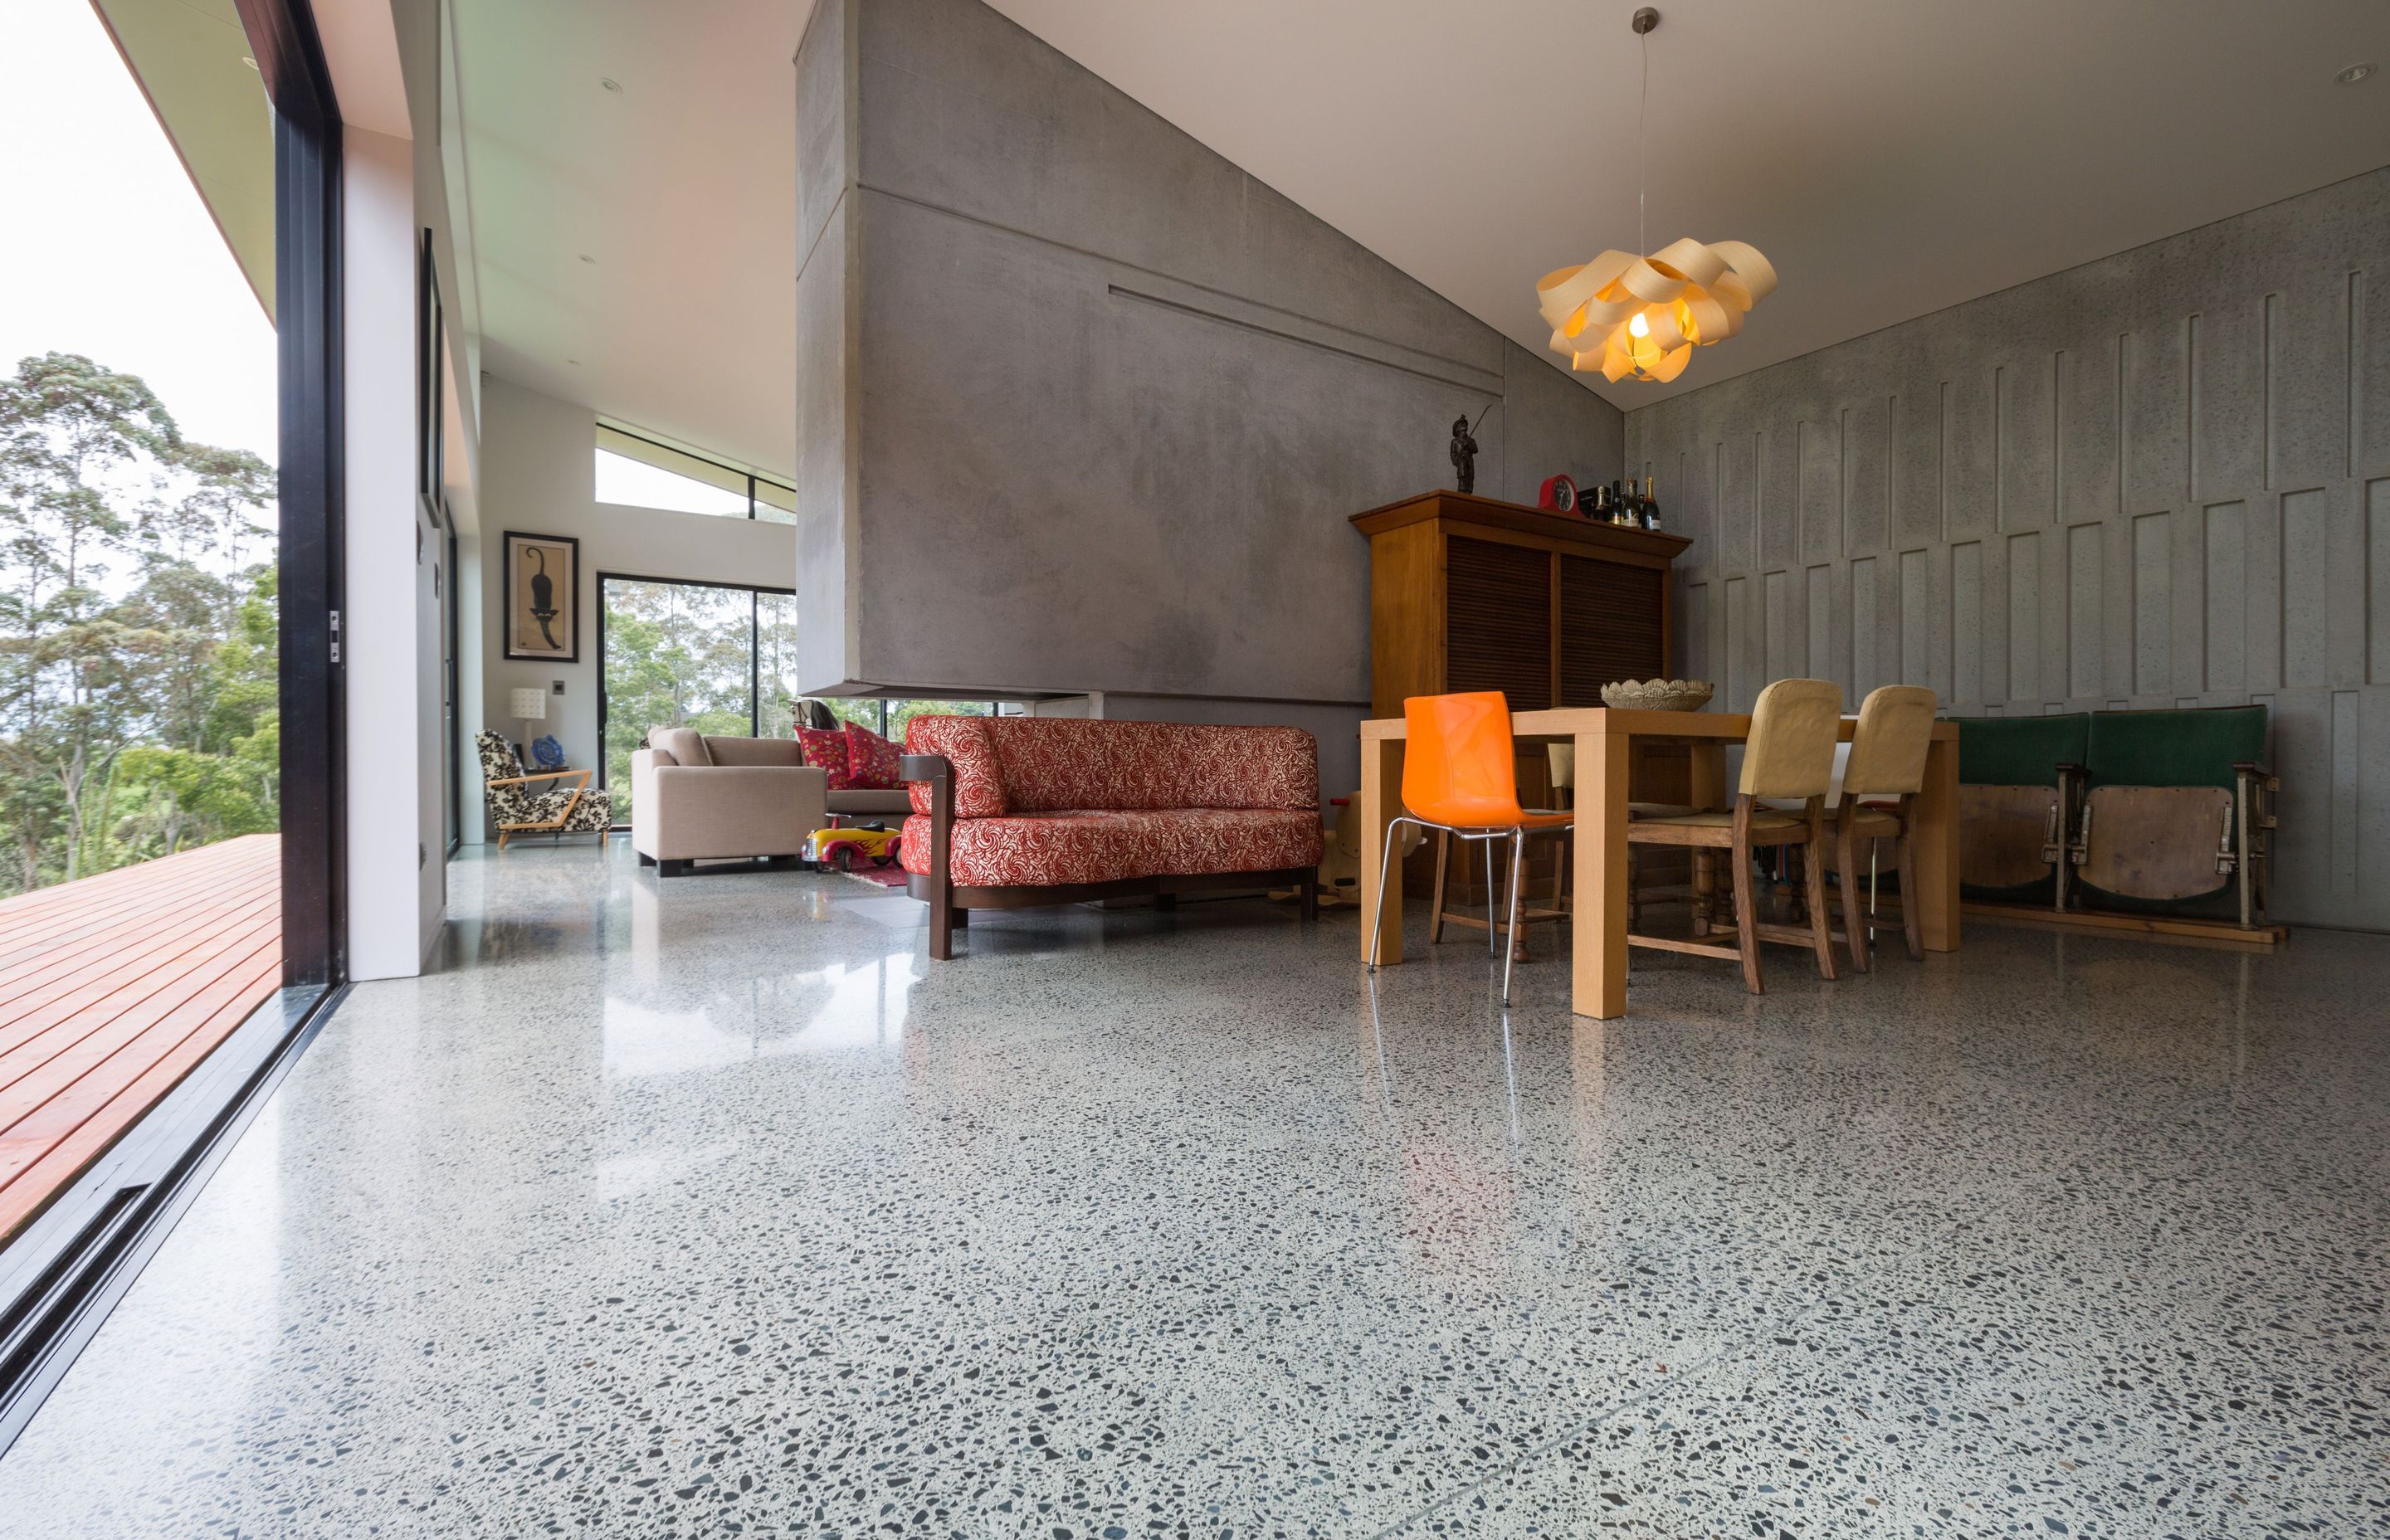 The most popular diamond polished finish, High Street has a high amount of exposed aggregate visible